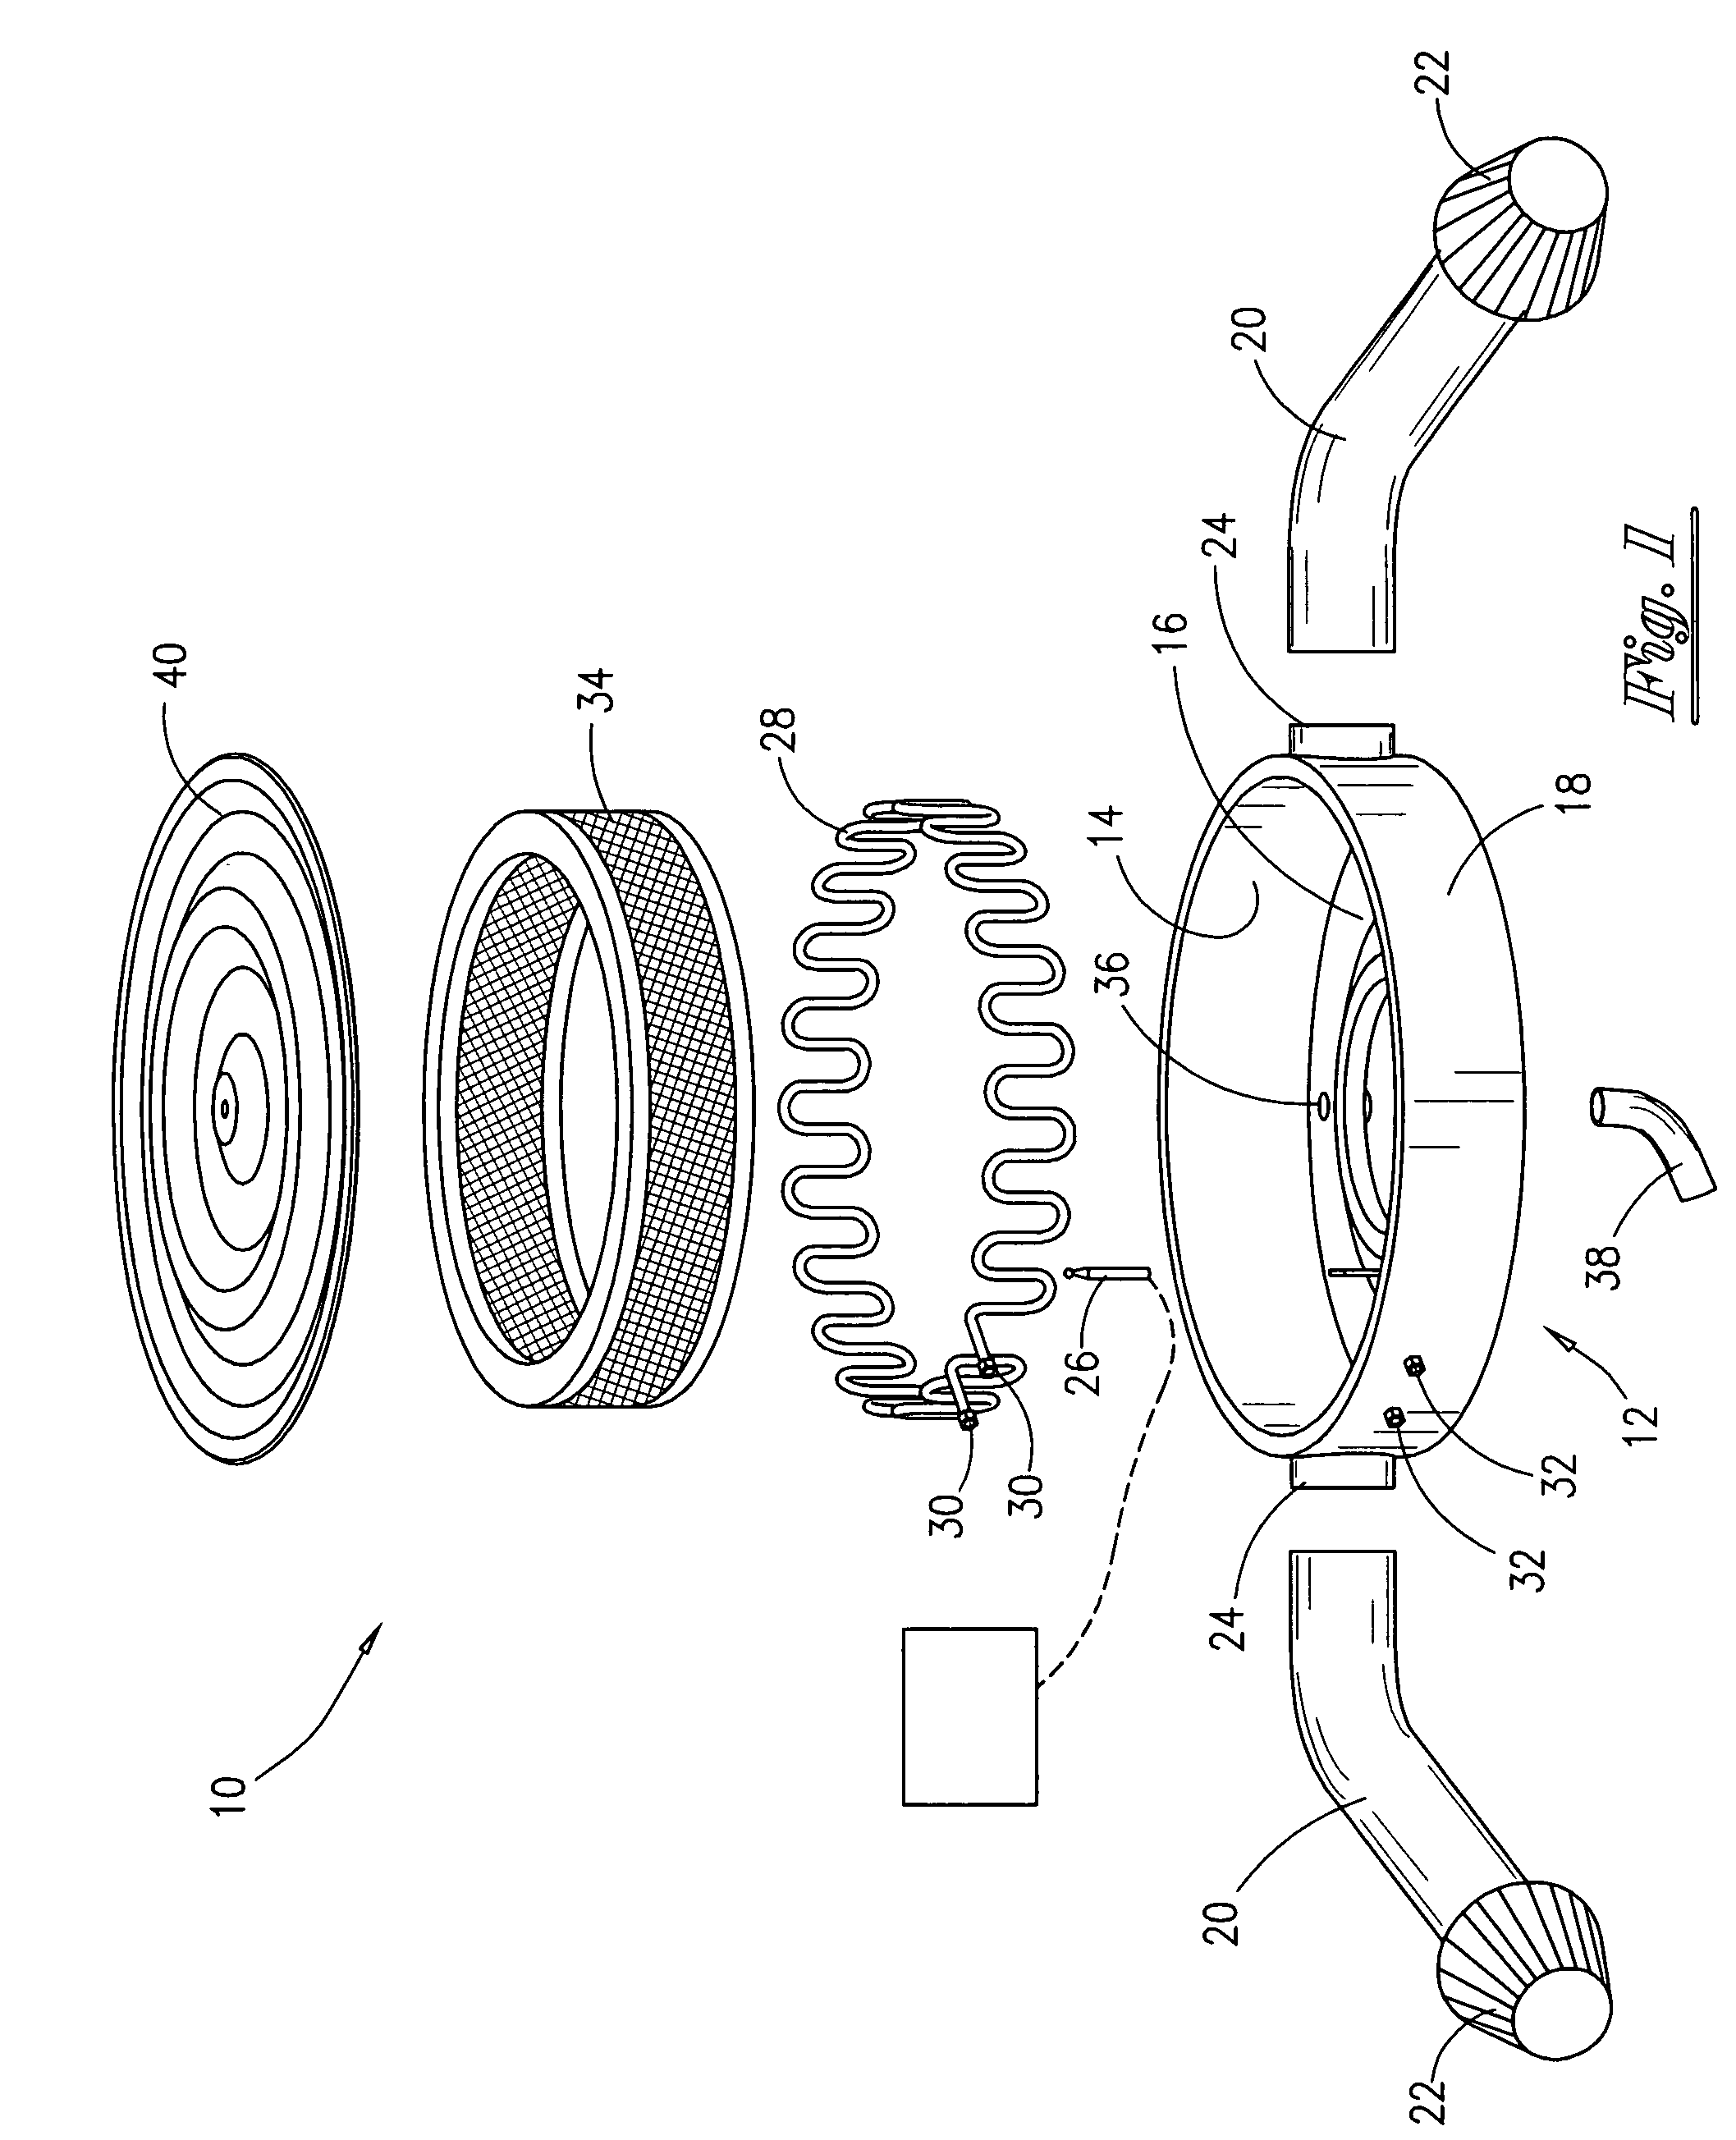 Engine air intake and fuel chilling system and method